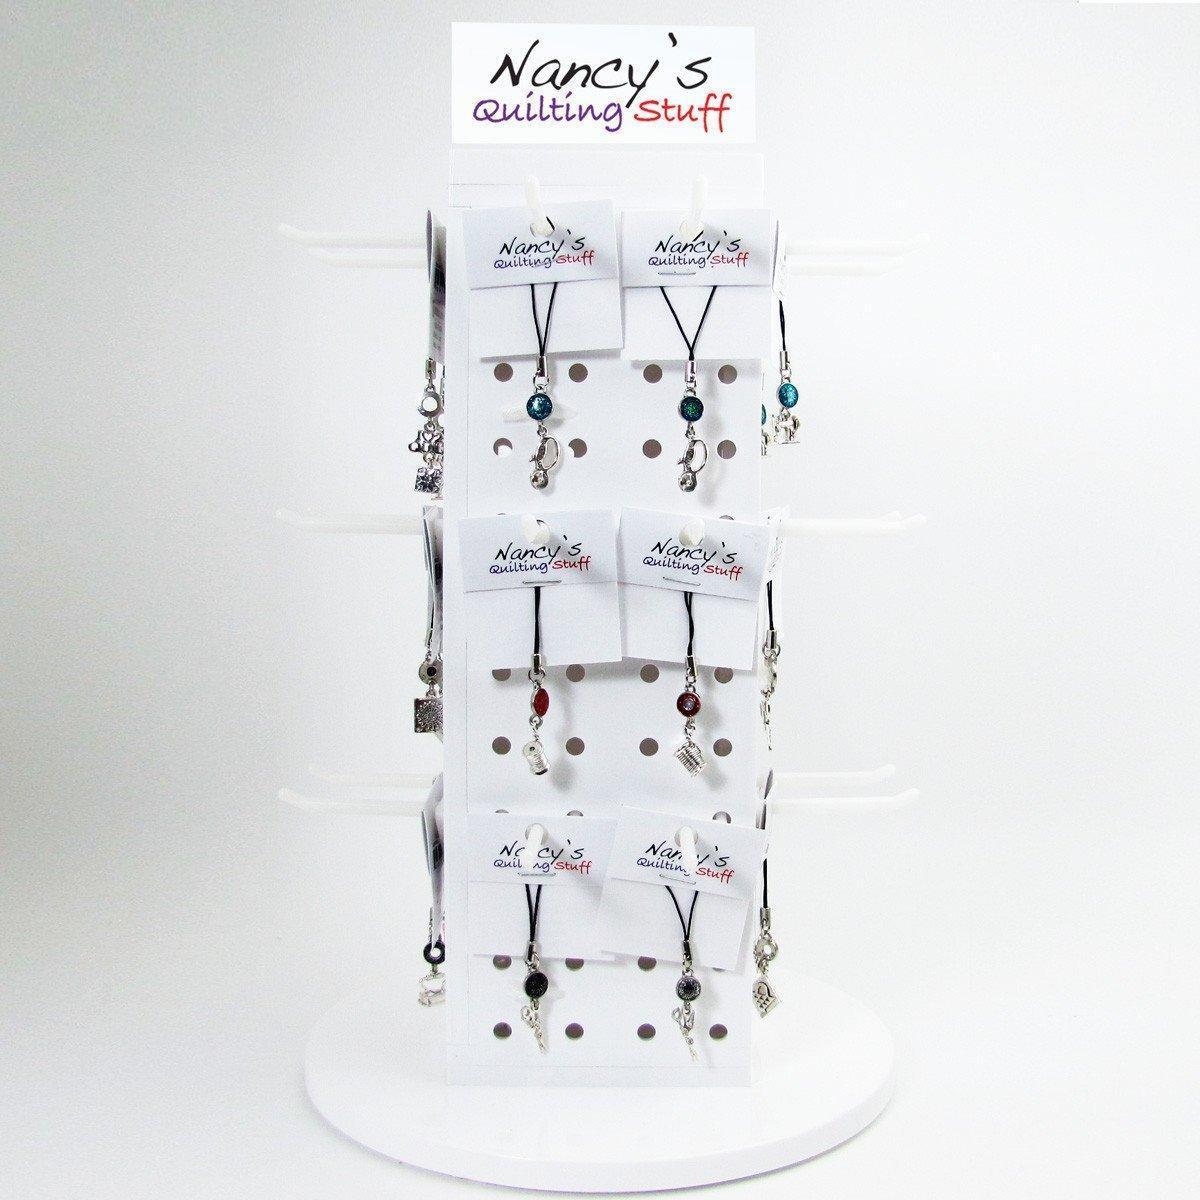 Quilting and Sewing Scissor Fob Display Rack